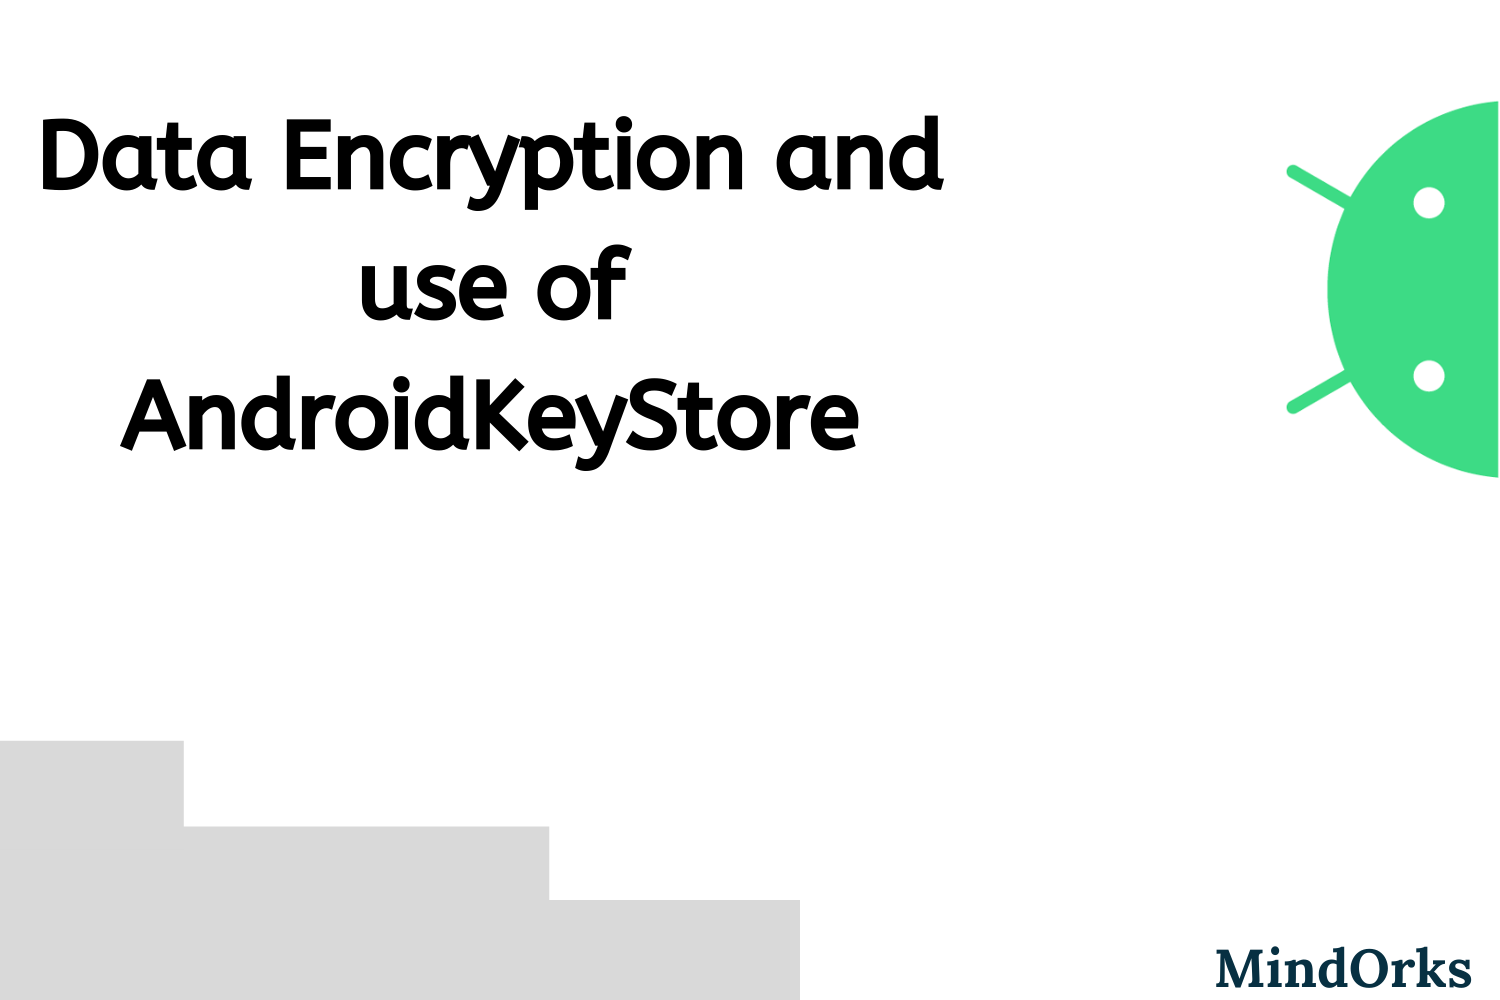 How to encrypt data safely on device and use the AndroidKeystore?